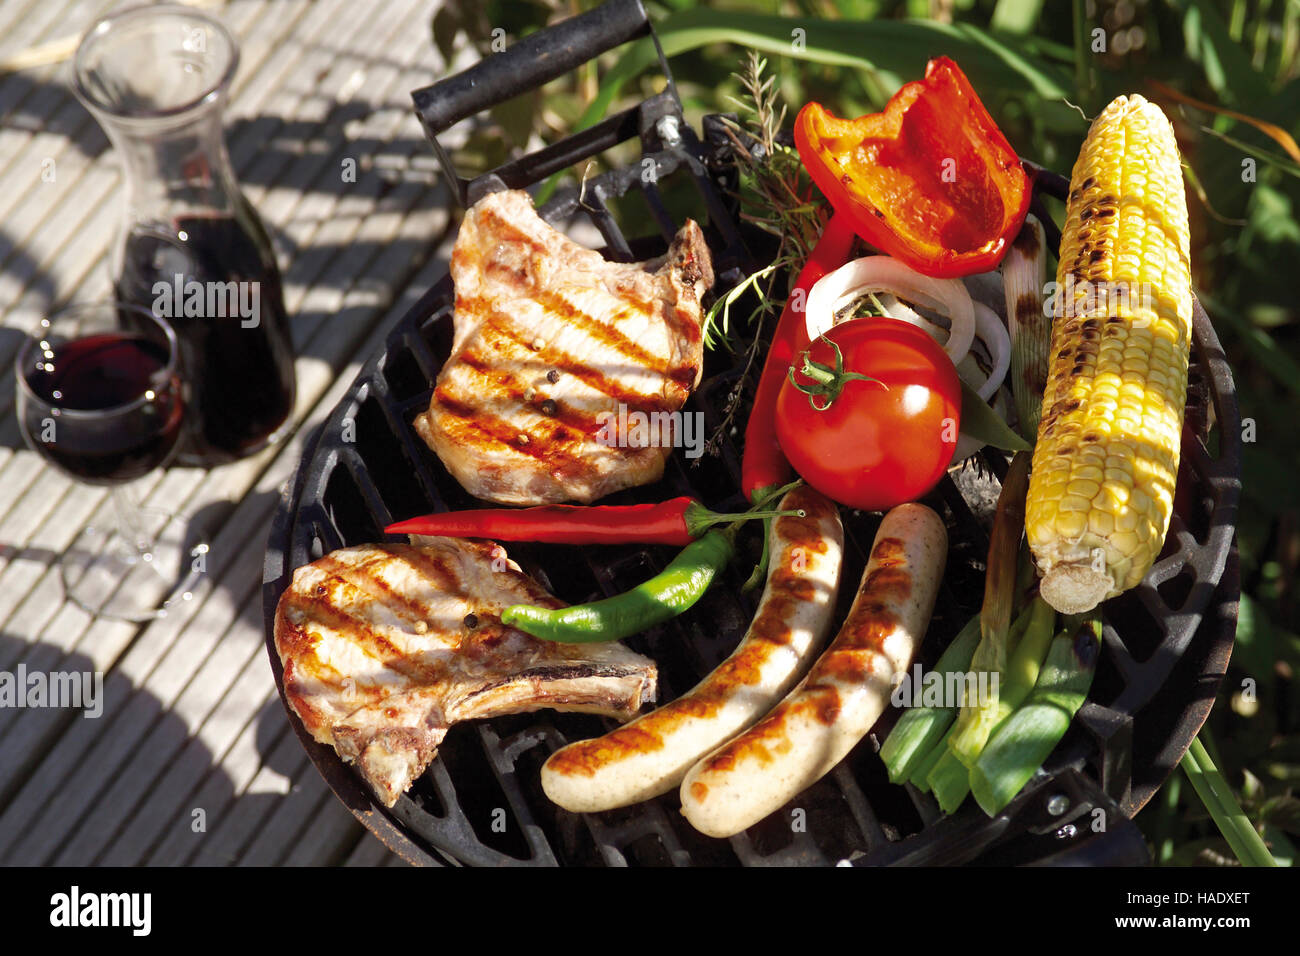 Outdoor barbecue, meat chops, sausages, tomatoes, red wine, corn on the cob, peppers Stock Photo